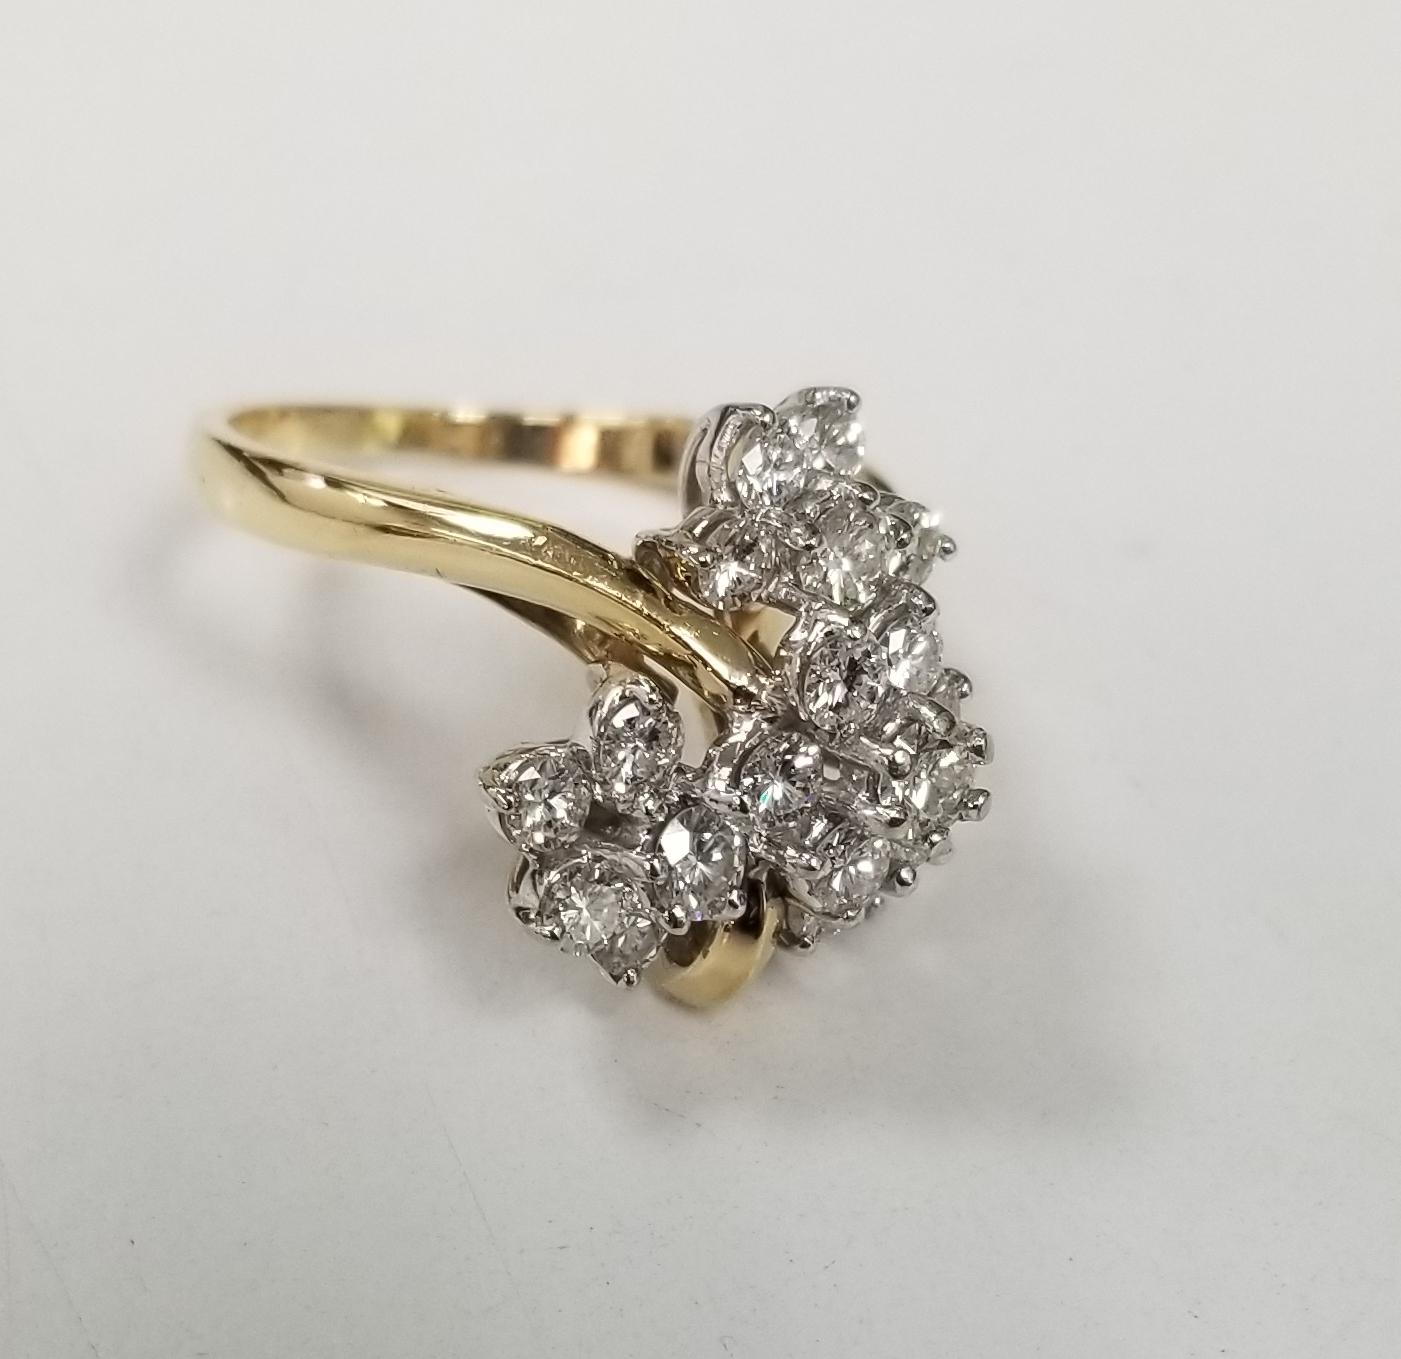 Specifications:
    main stone: ROUND DIAMONDS
    DIAMONDS: 19 PCS
    CARAT TOTAL WEIGHT: APPROXIMATELY 1.50 CTS
    color: G
    clarity: VS
    brand: UNBRANDED
    metal: 18K YELLOW GOLD
    type:  RING
    weight: 6.2 GRS 
    SIZE: 6.75US


